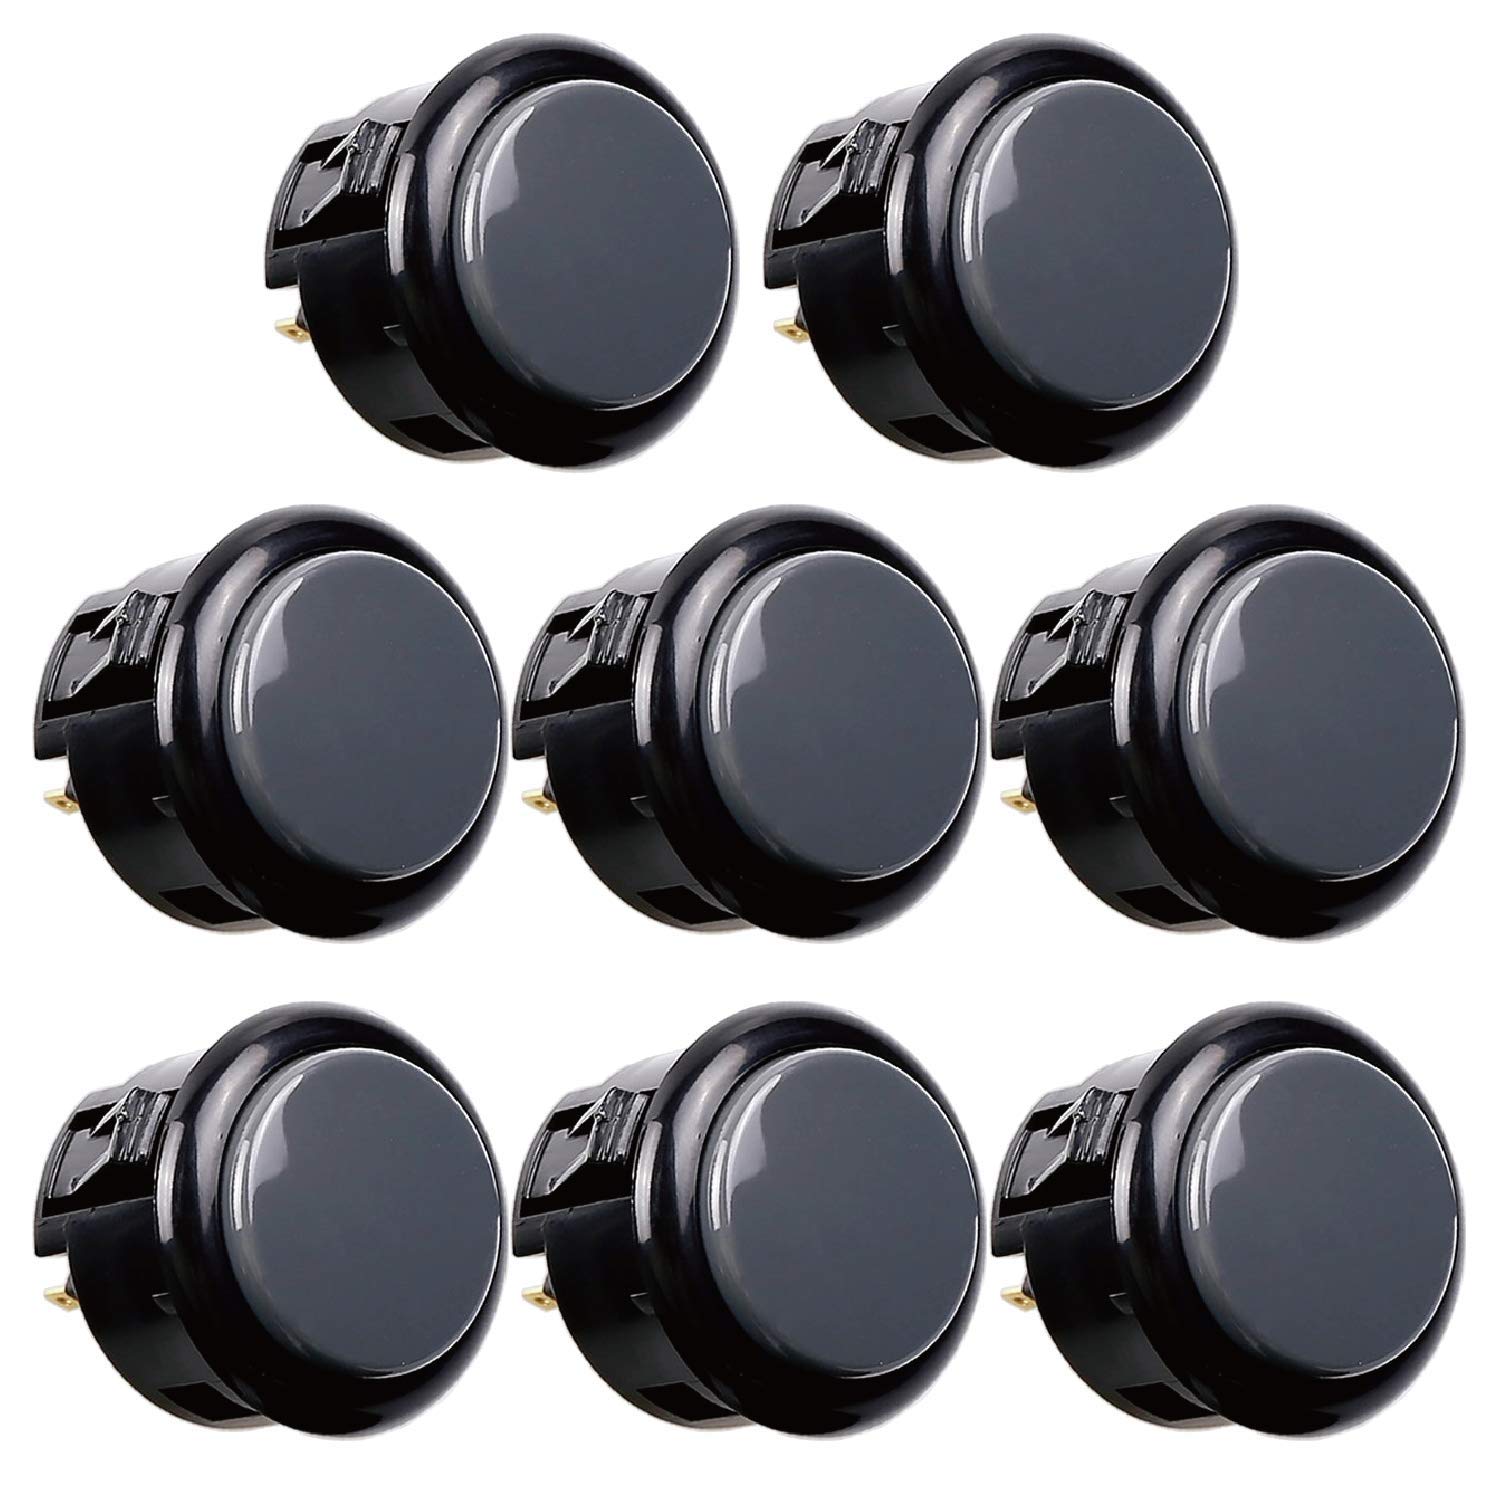 Book Cover Sanwa 8 pcs OBSF-30 Original Push Button 30mm - for Arcade Jamma Video Game & Arcade Joystick Games Console (Gray), Use for Arcade Game Machine Cabinet S@NWA 30mm Gray